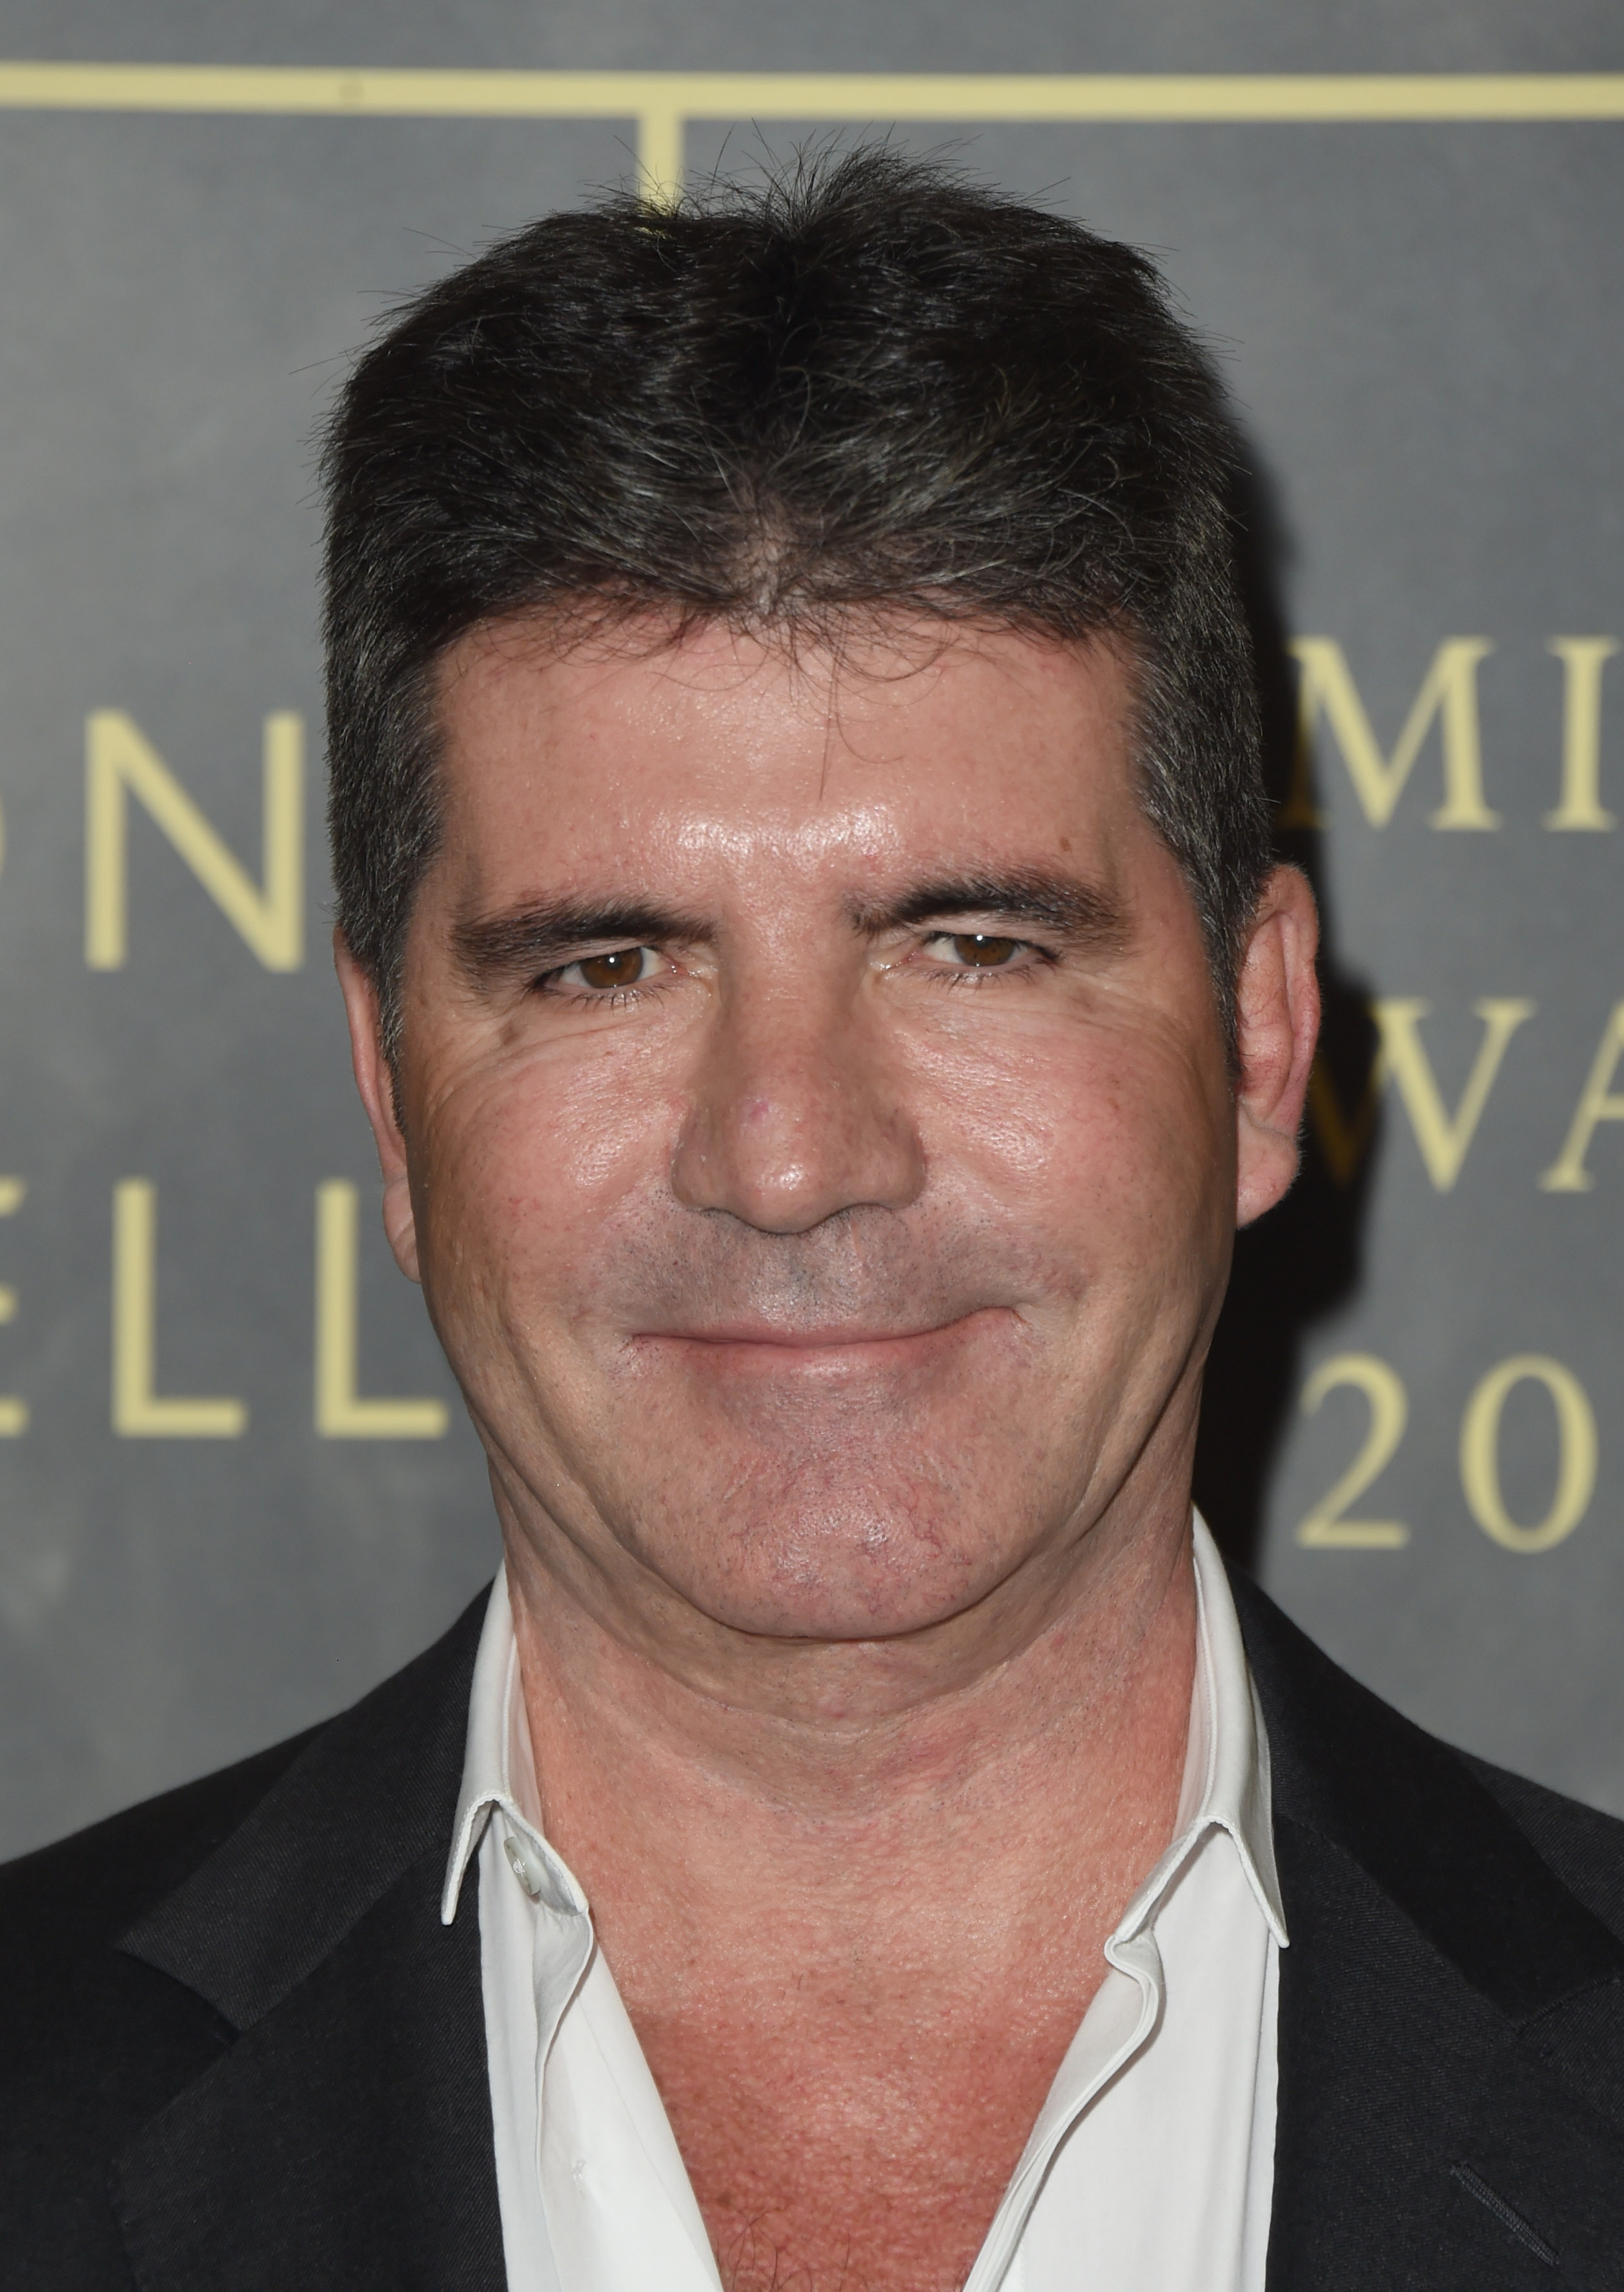 Simon Cowell at the Music Industry Trust Awards in London in 2015 | Source: Getty Images